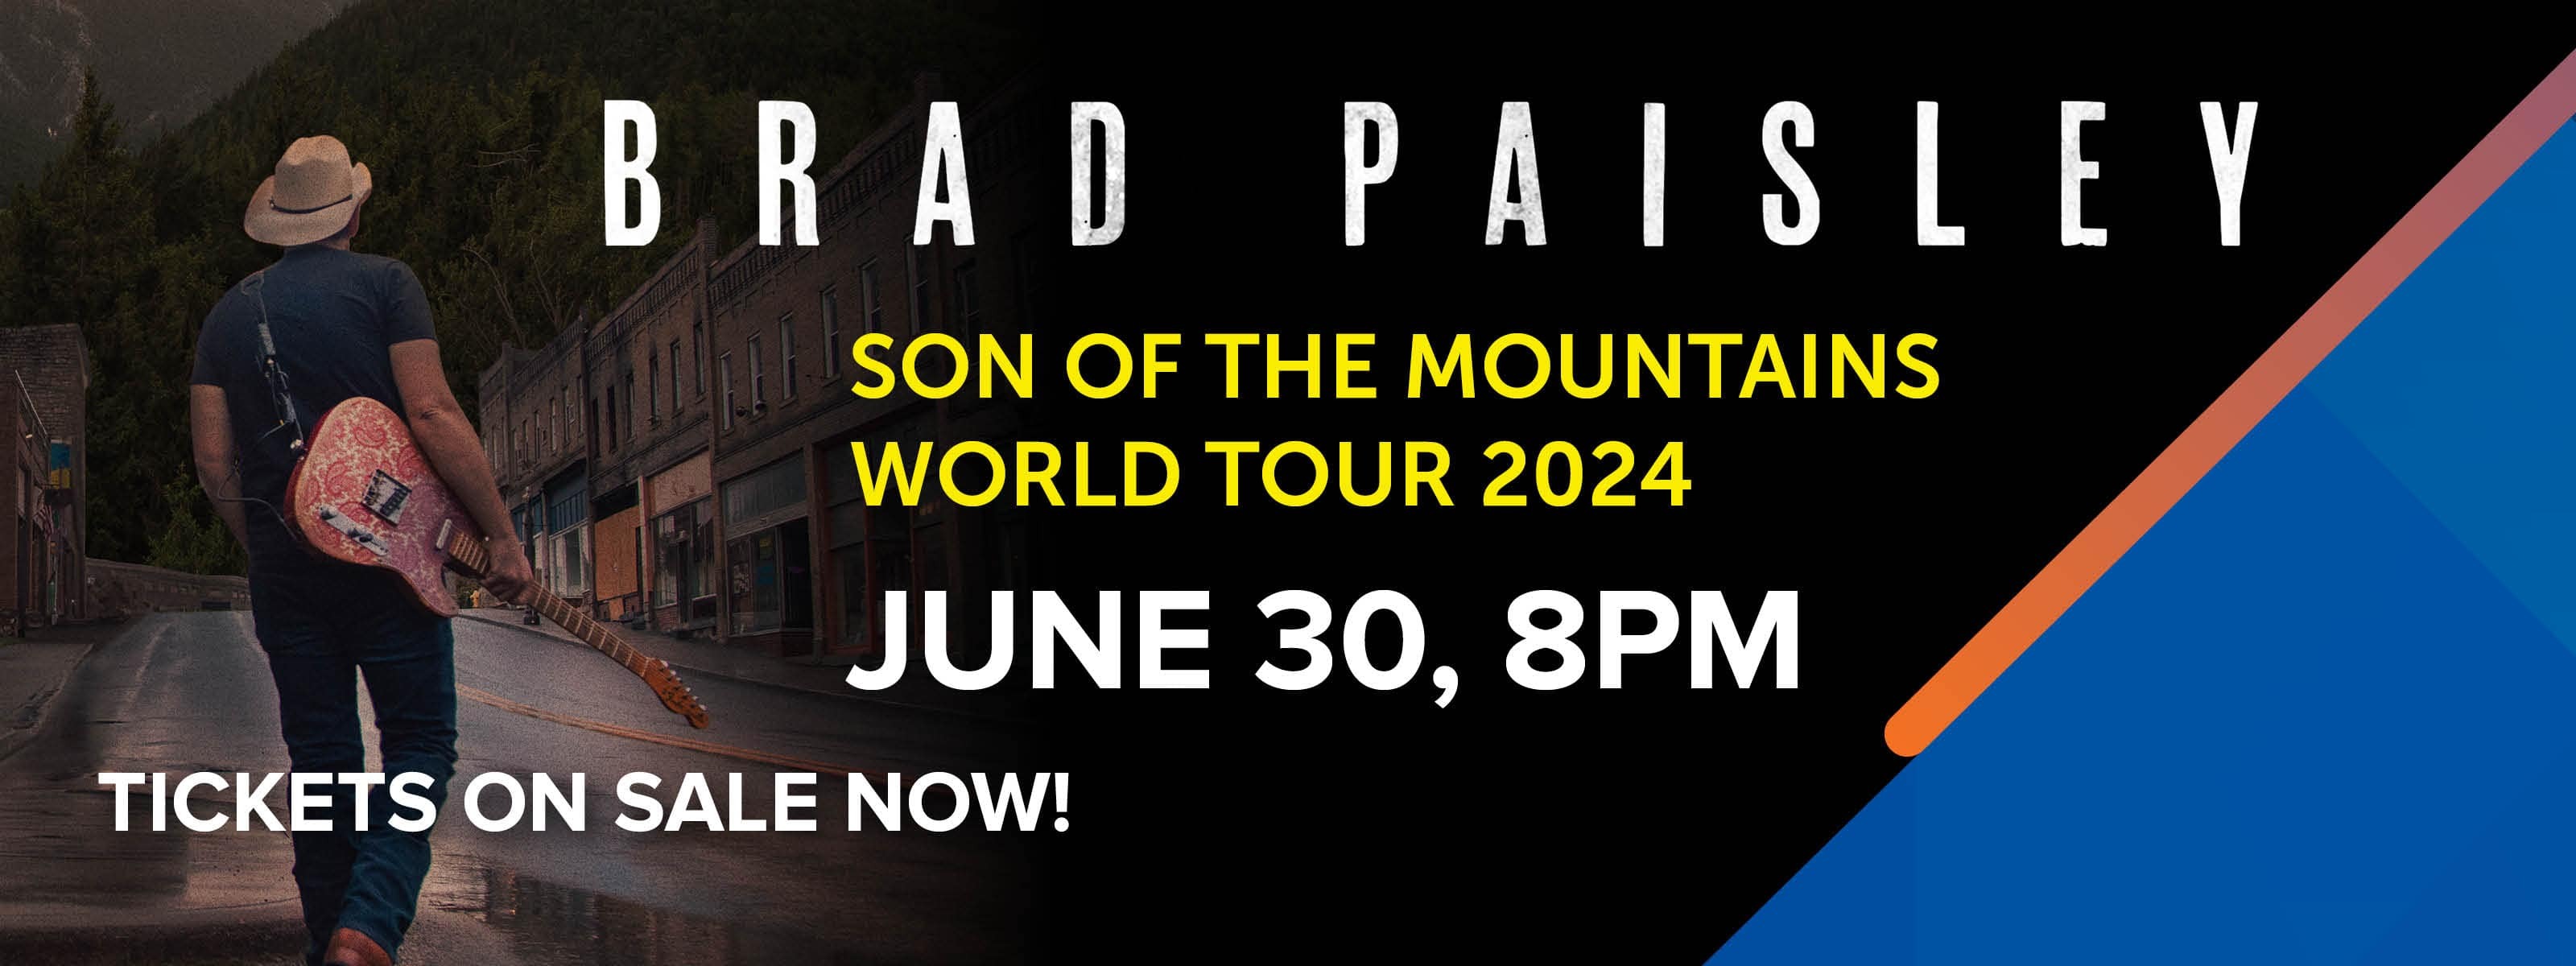 Brad Paisley Son of the Mountains World Tour 2024. June 30, 8pm. Tickets On Sale Now